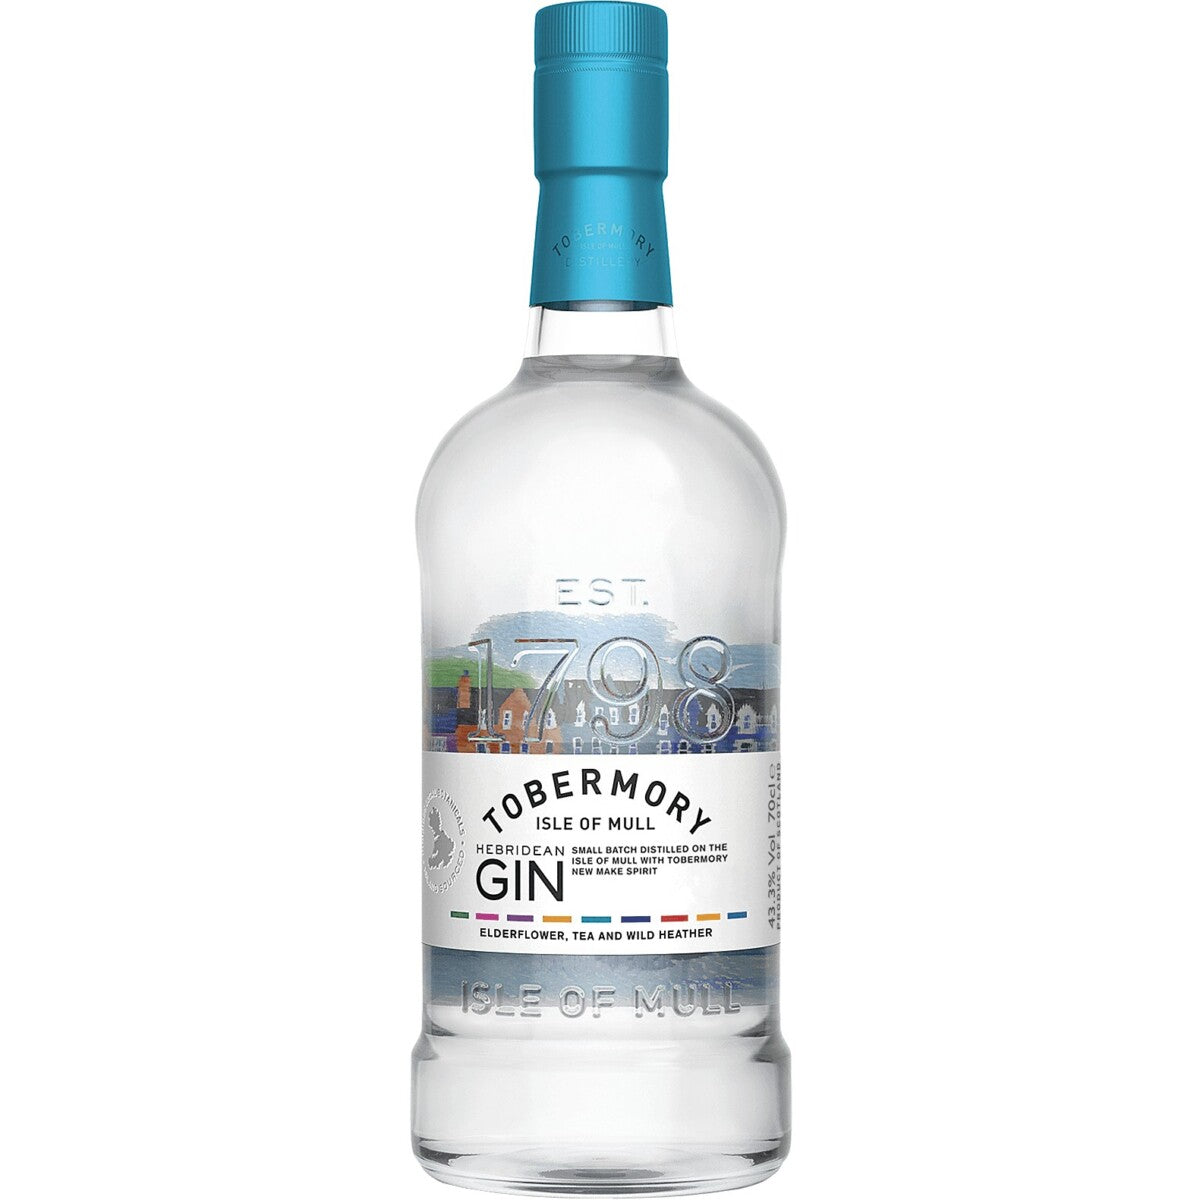 Tobermory (Isle of Mull) Hebridean Gin (1x70cl)